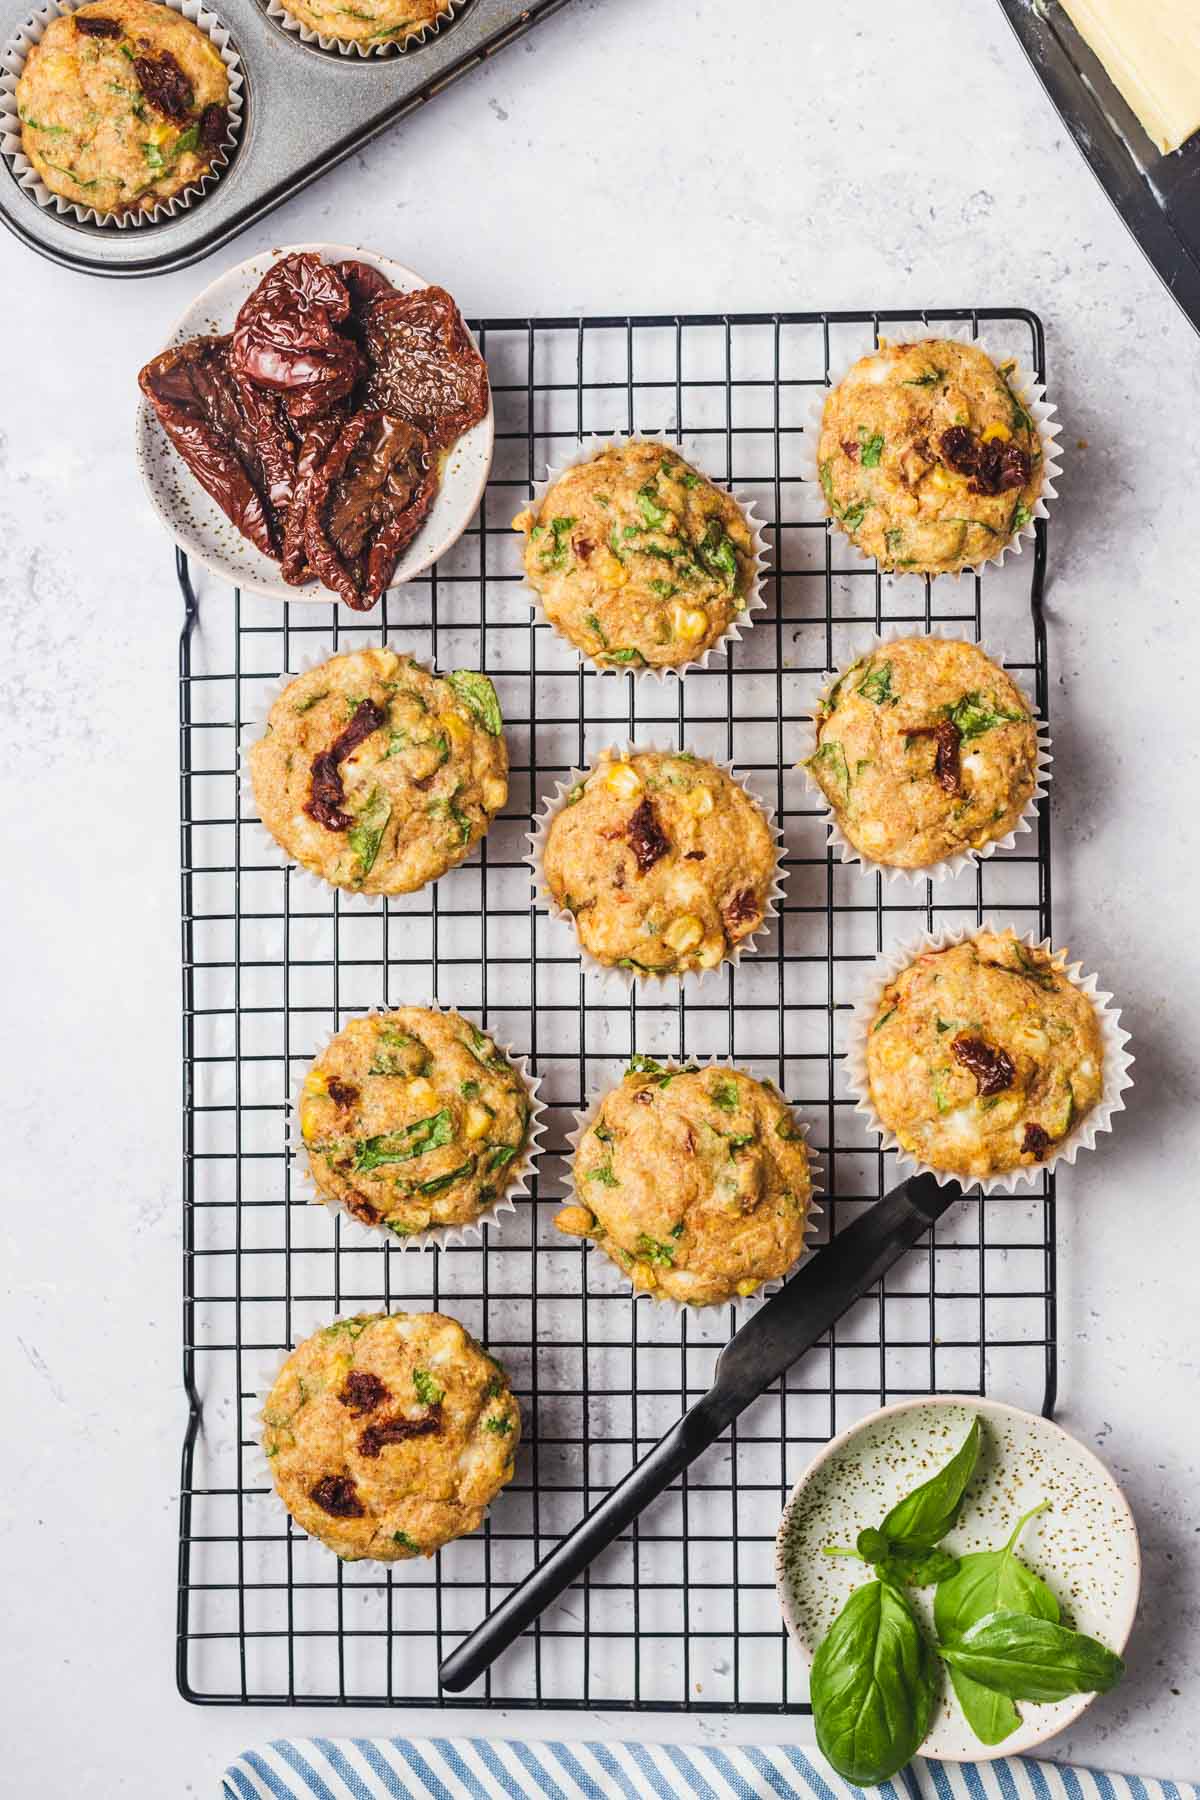 Birds eye view of savoury muffins with feta and vegetables on a cooling rack.